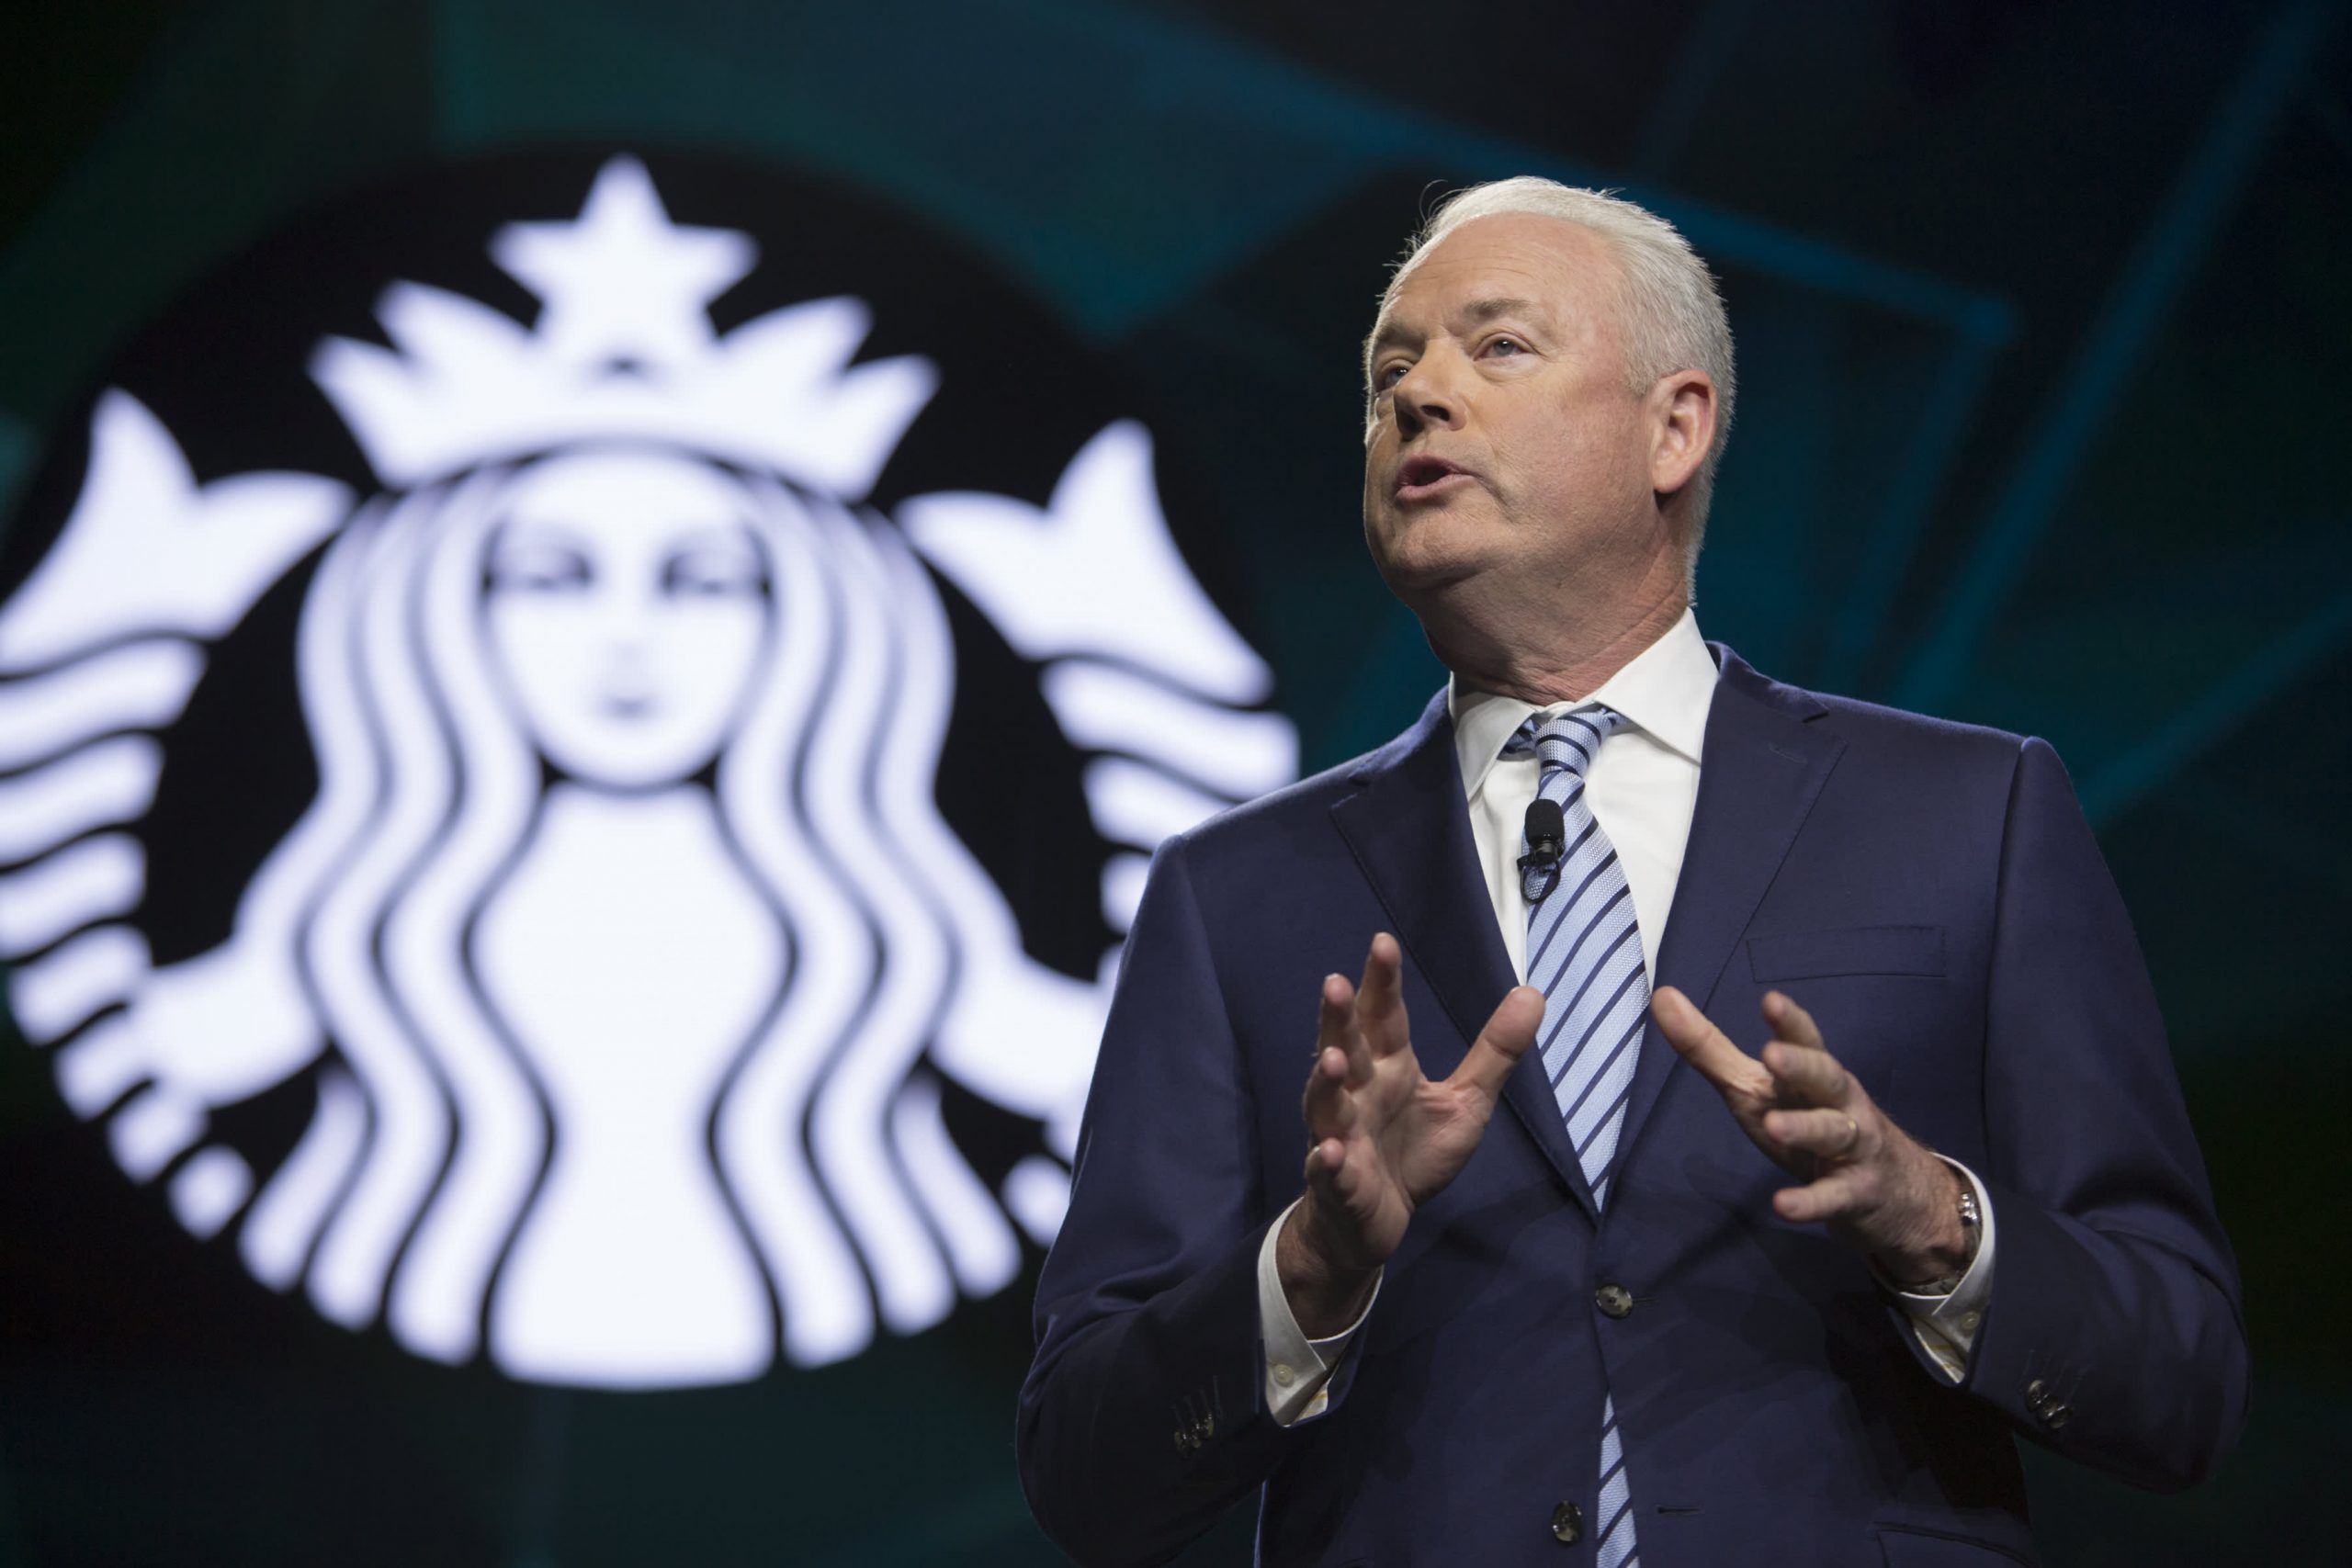 Starbucks sets goal of making its green coffee carbon neutral by 2030